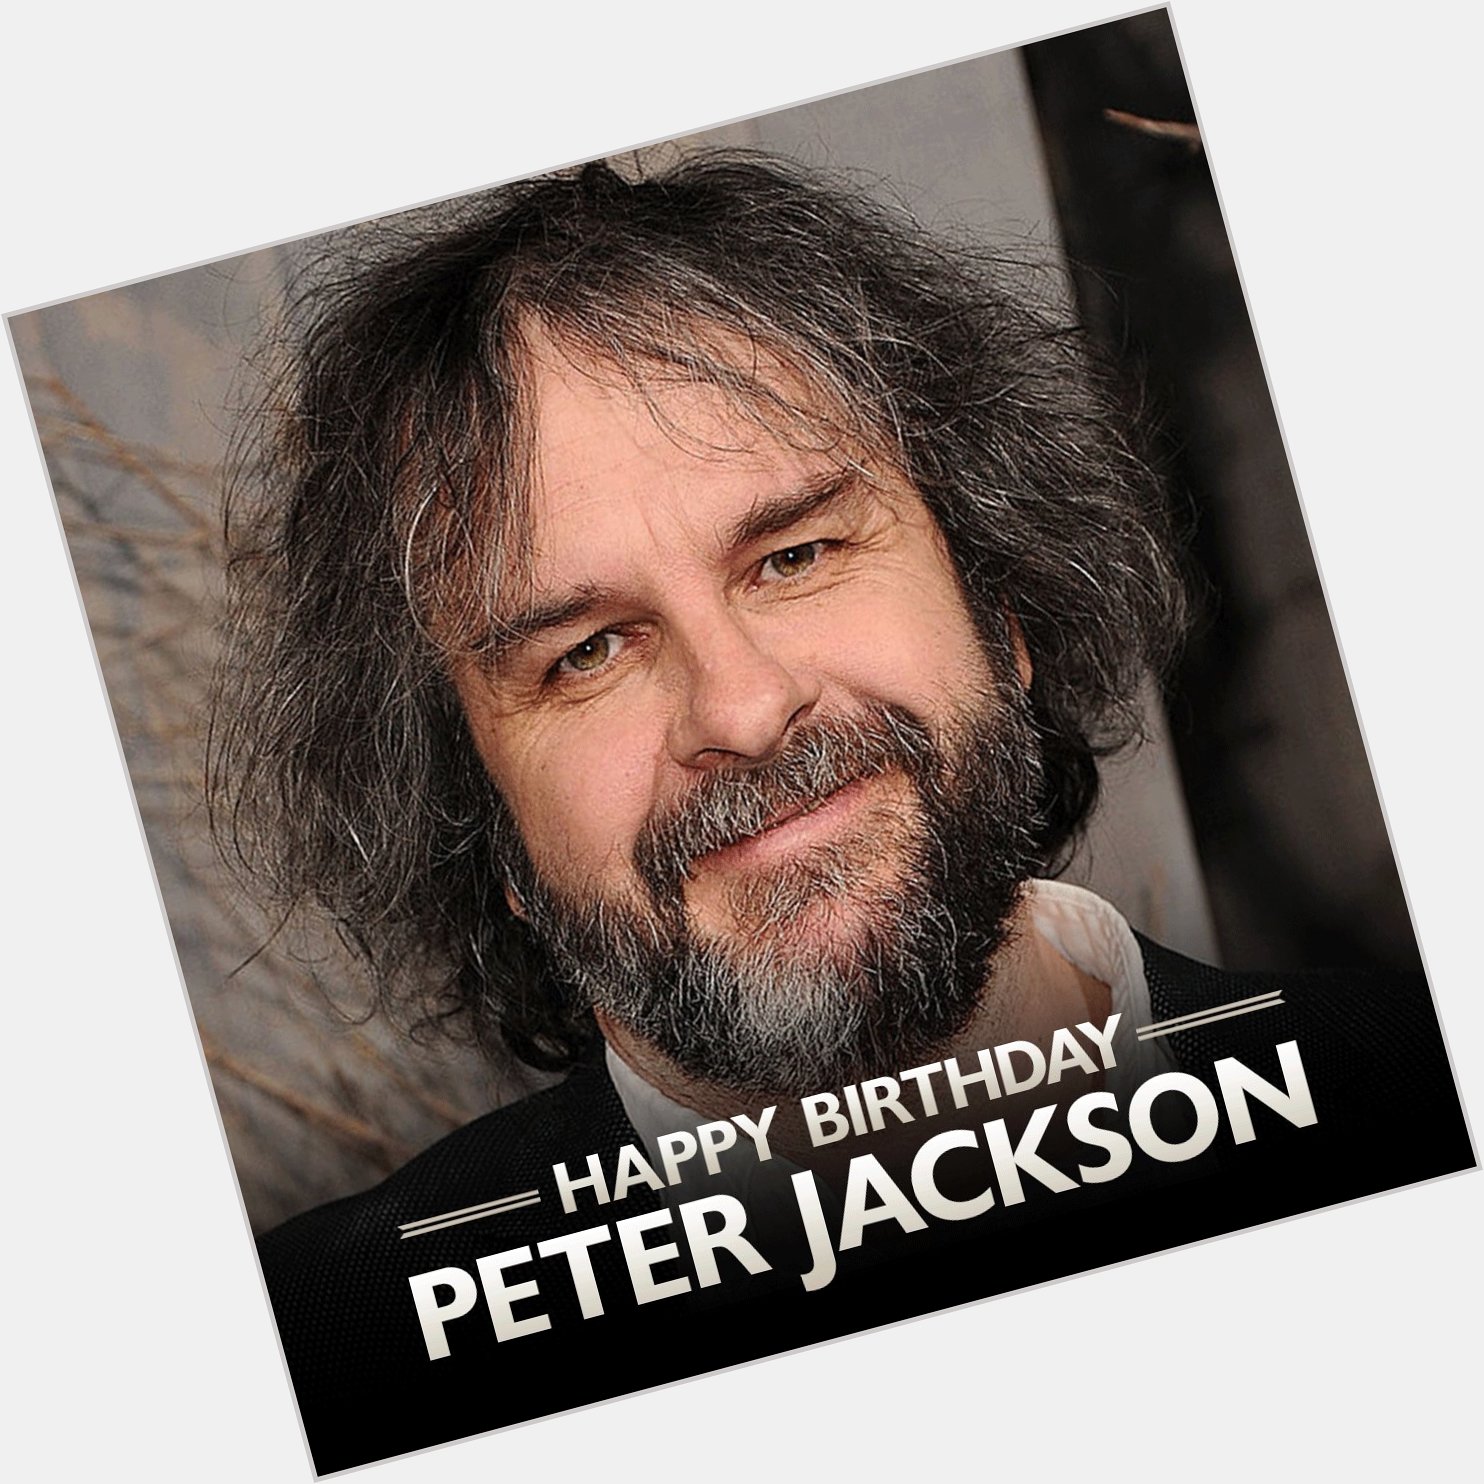 A happy birthday to one of the great minds behind Peter Jackson. 